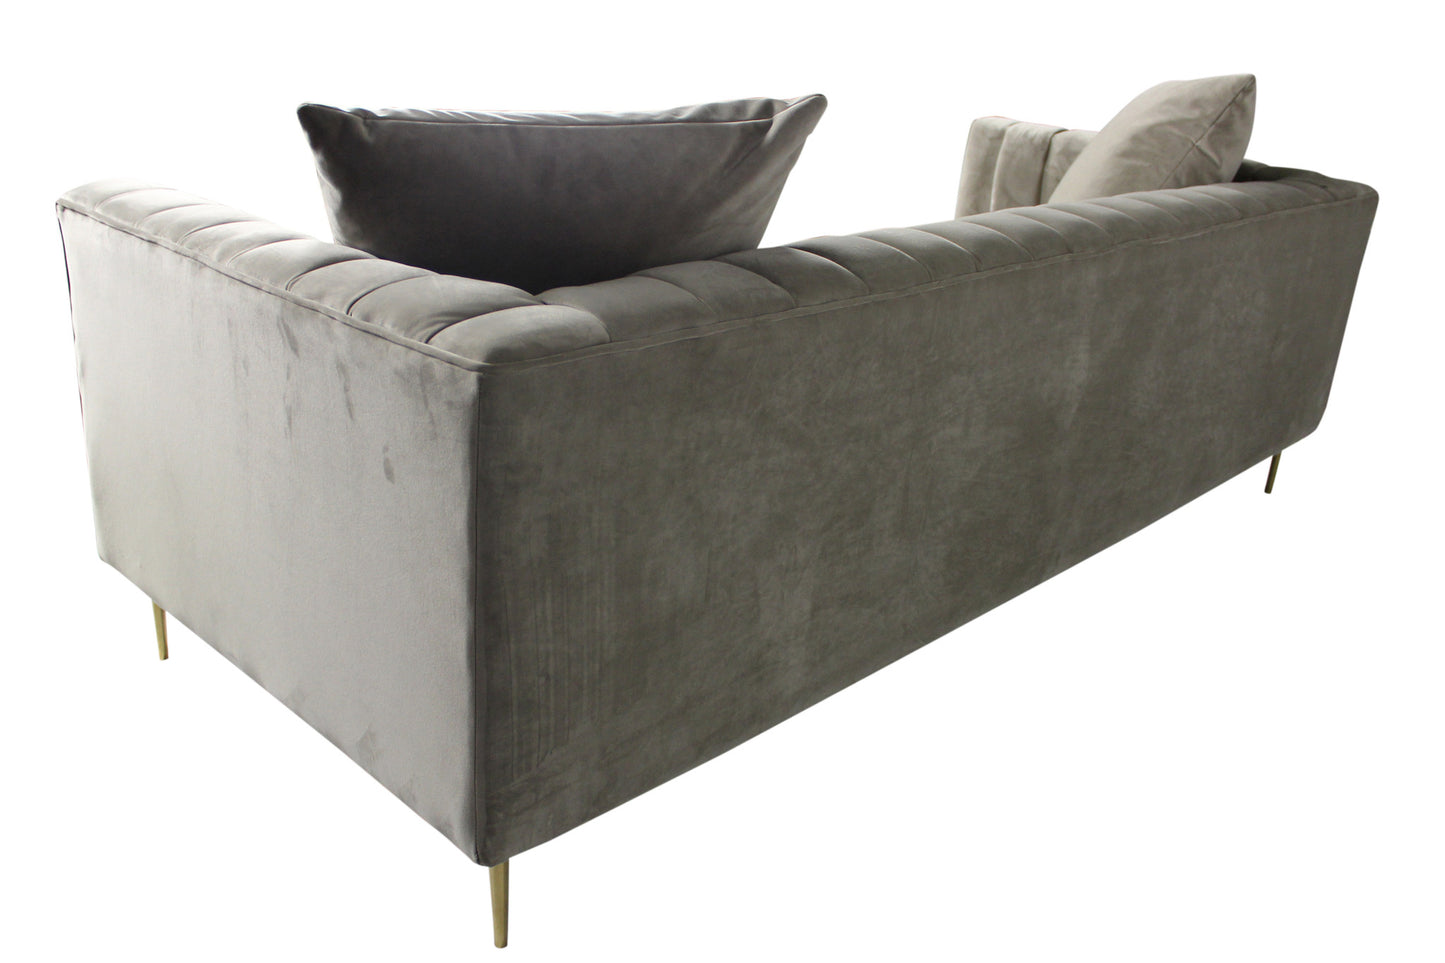 90" Gray Brown Velvet Sofa And Toss Pillows With Gold Legs